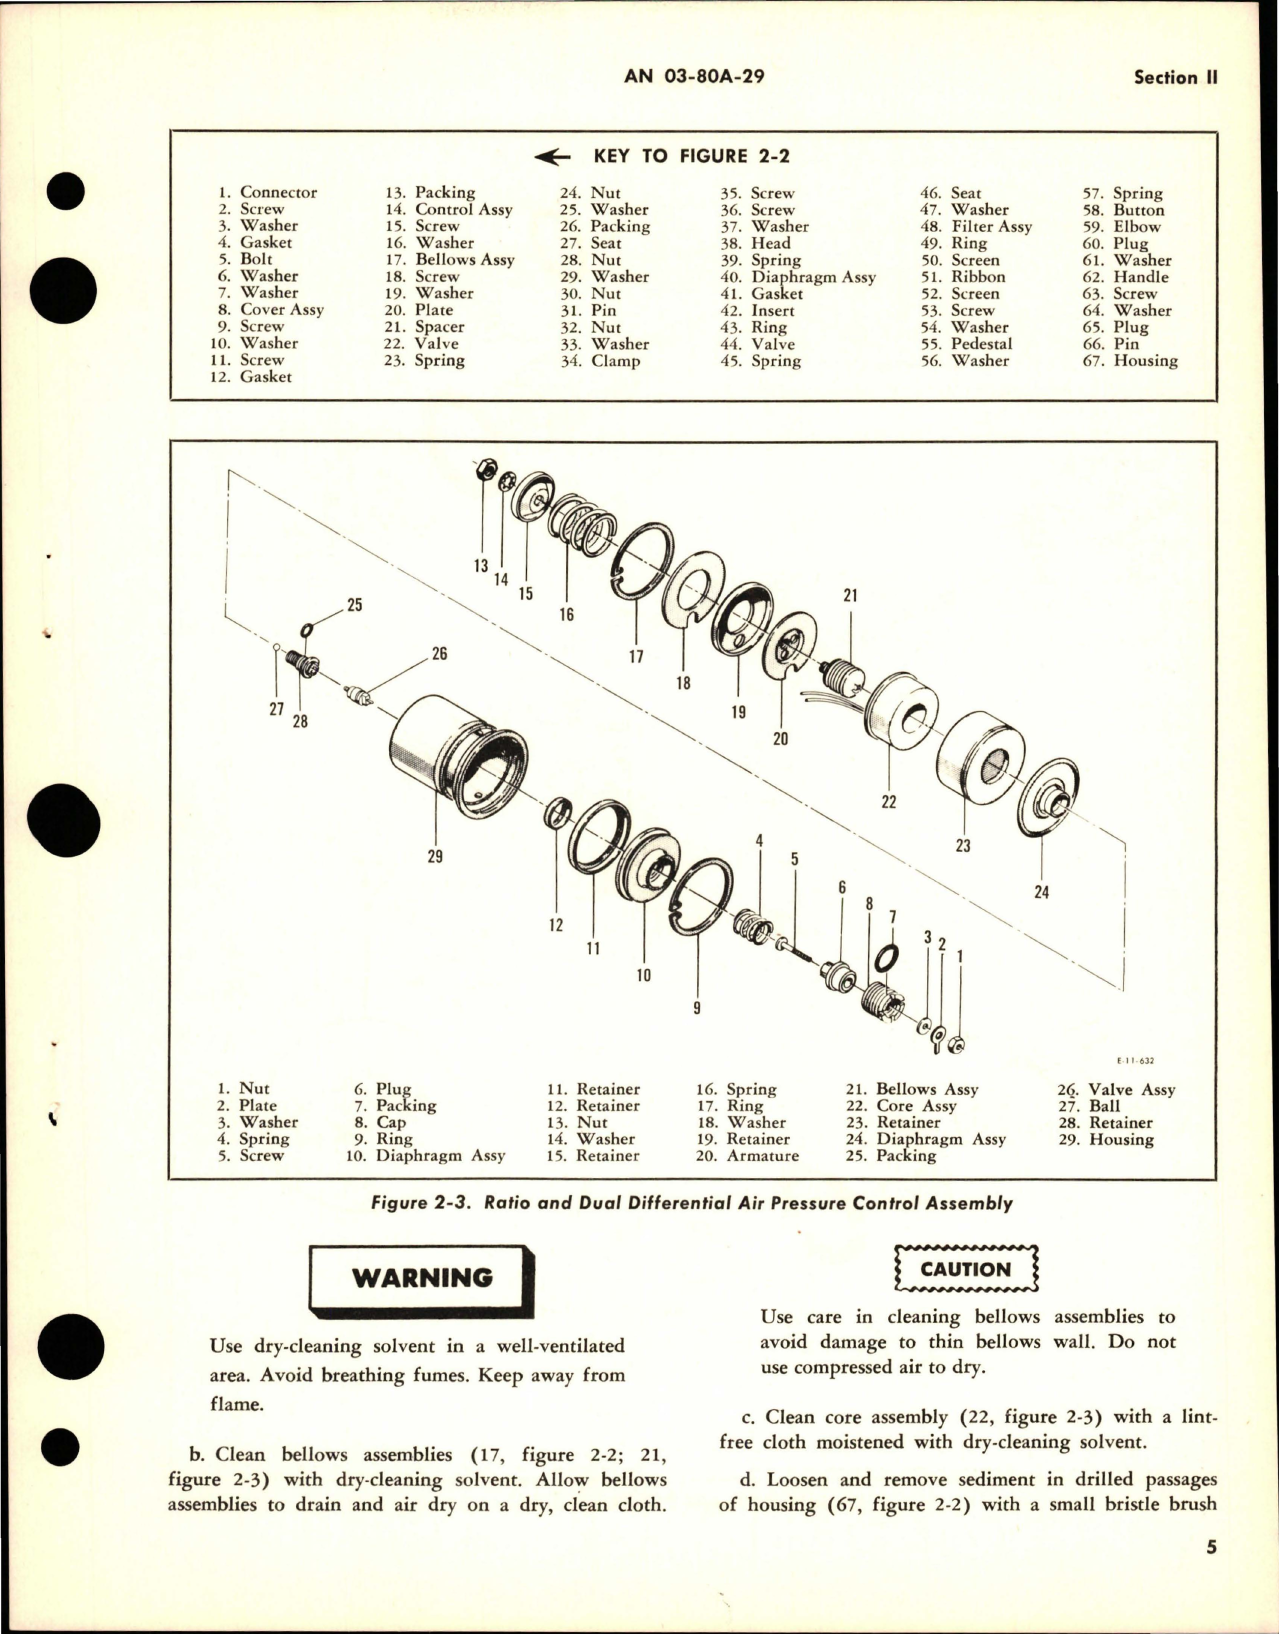 Sample page 9 from AirCorps Library document: Overhaul Instructions for Aircraft Cabin Air Pressure Regulators - Parts 14600-5-33 and 14600-5-33-3 - Model CPR1-8